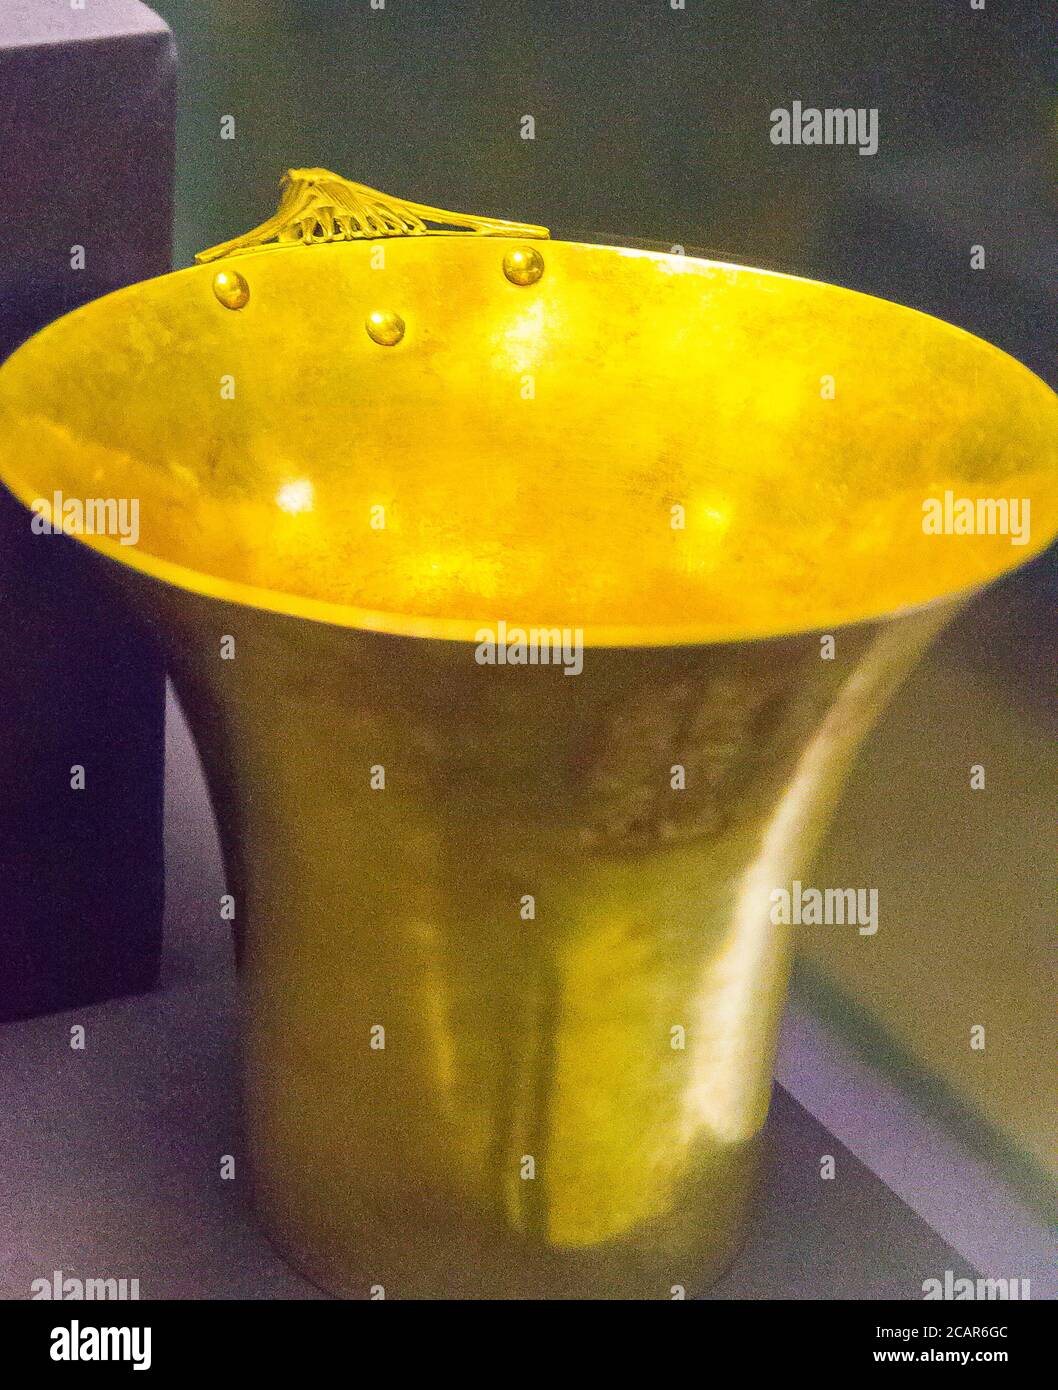 Egypt, Cairo, Egyptian Museum, dishes found in the royal necropolis of Tanis, burial of Psusennes : Gold goblet in the shape of a lotus flower. Stock Photo